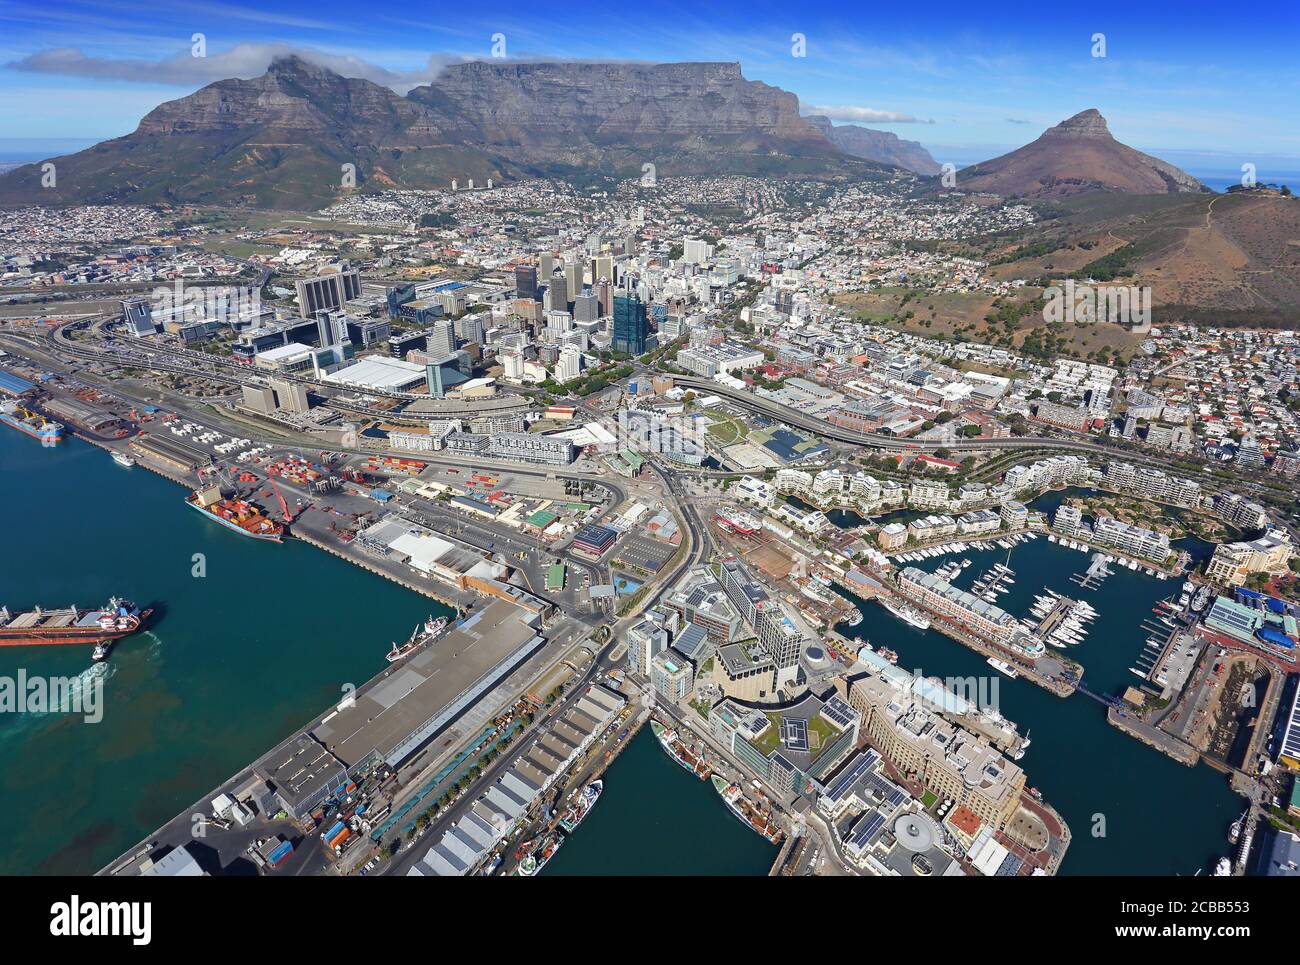 Cape Town, Western Cape / South Africa - 04/26/2019: Aerial photo of The Silos District with Table Mountain in the background Stock Photo